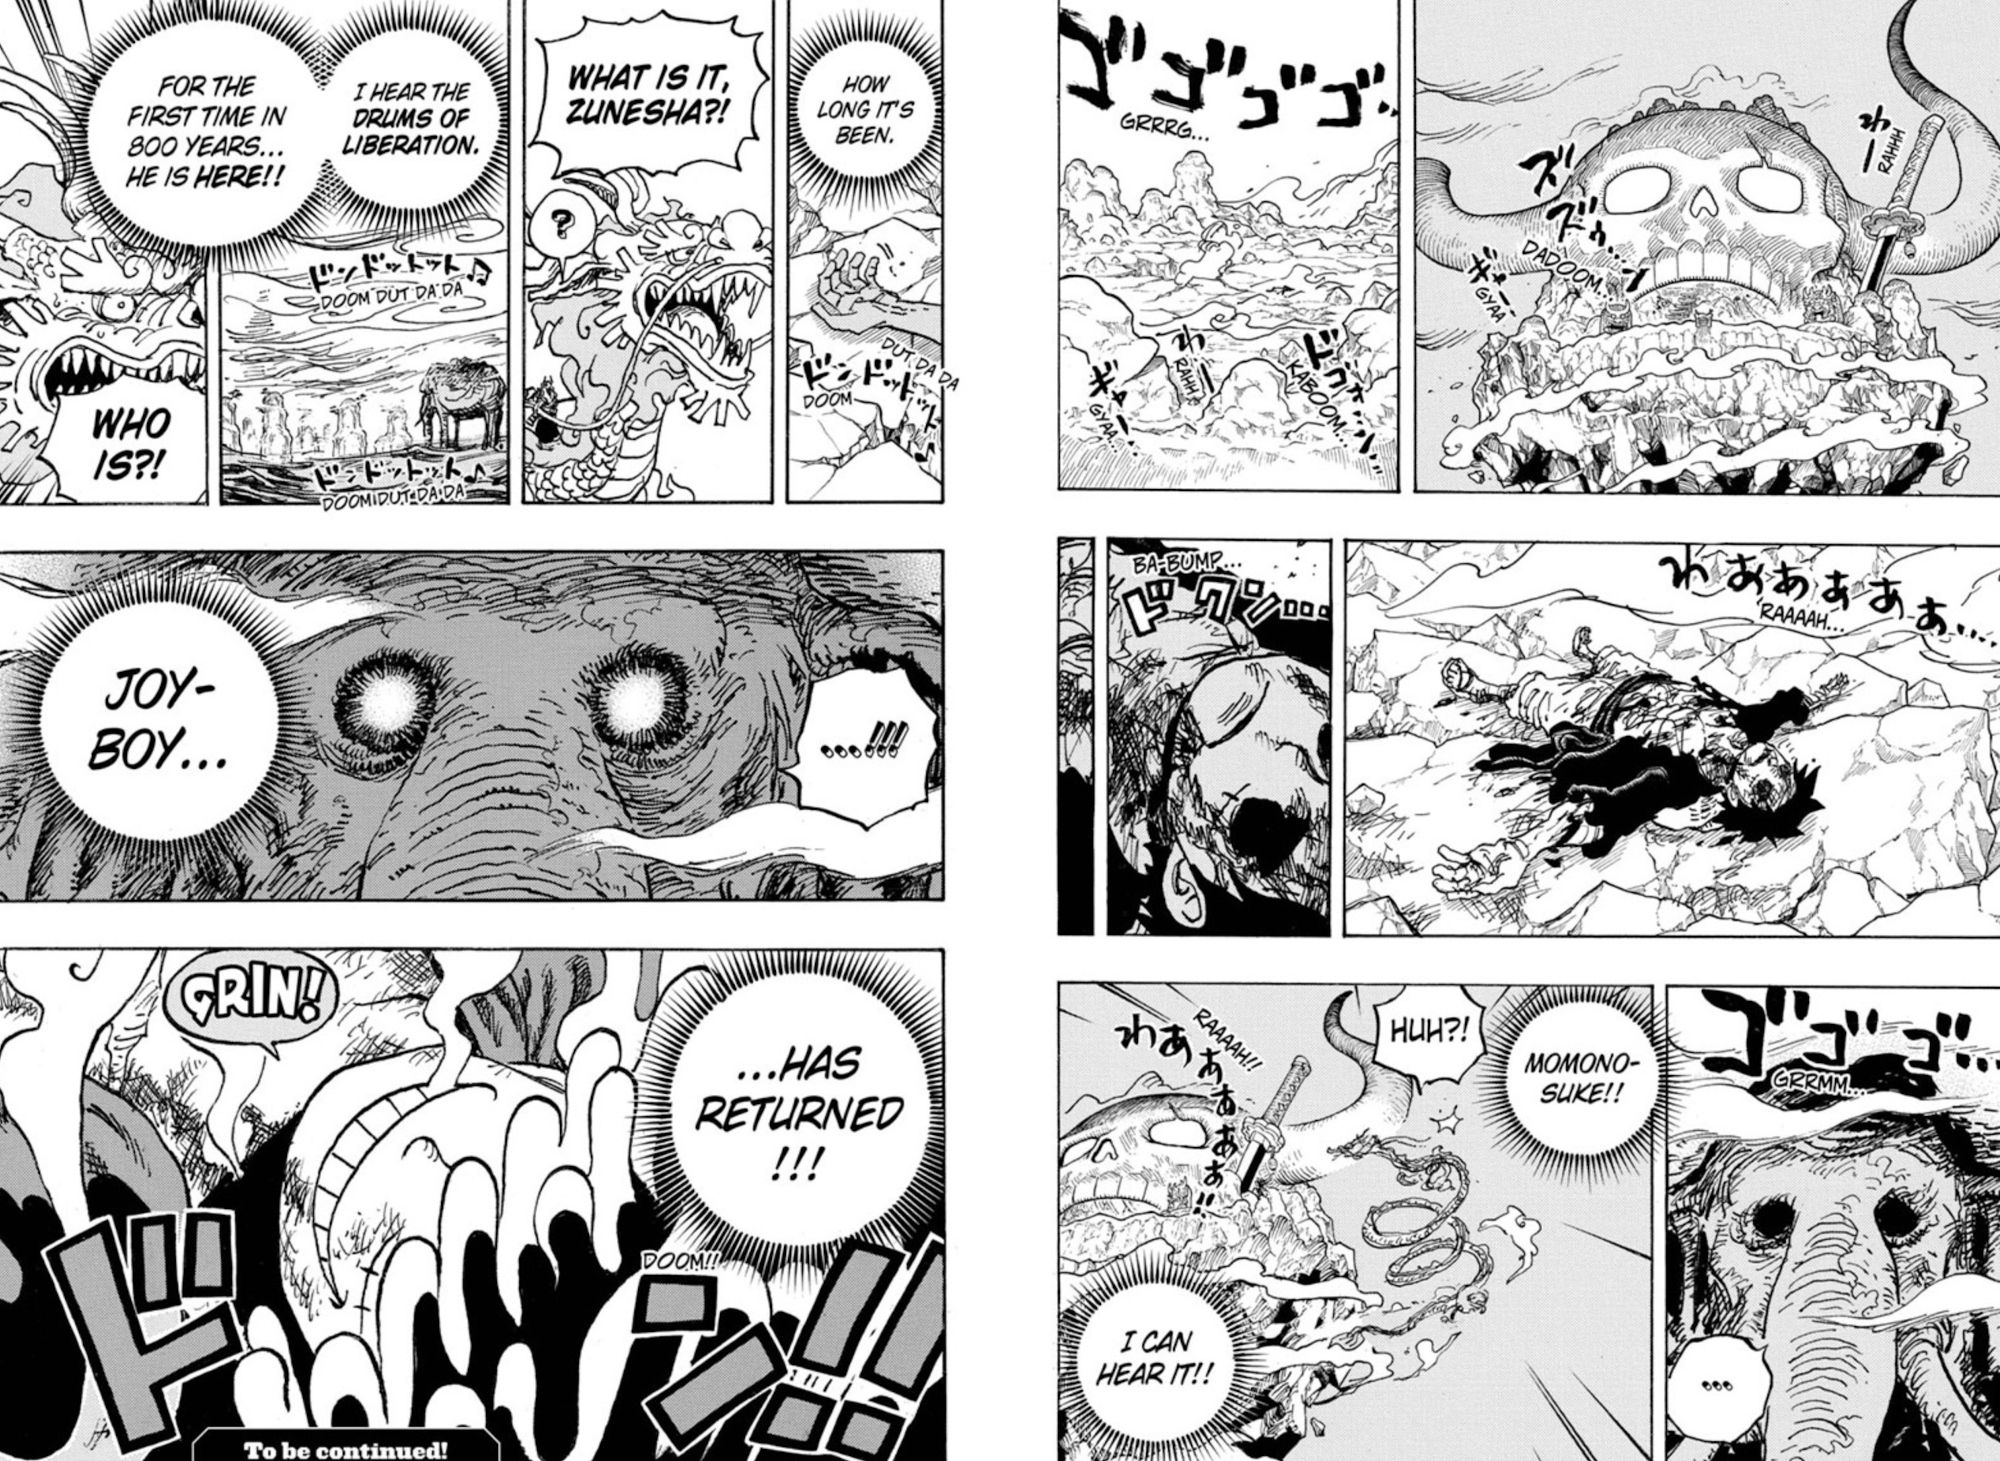 Manga panels from One Piece chapter 1043 show Luffy laying on the ground beaten, then Zunesha speaks to Momonosuke about hearing the Drums of Liberation and that Joy Boy has returned as Luffy smiles and begins to change into Gear 5th.